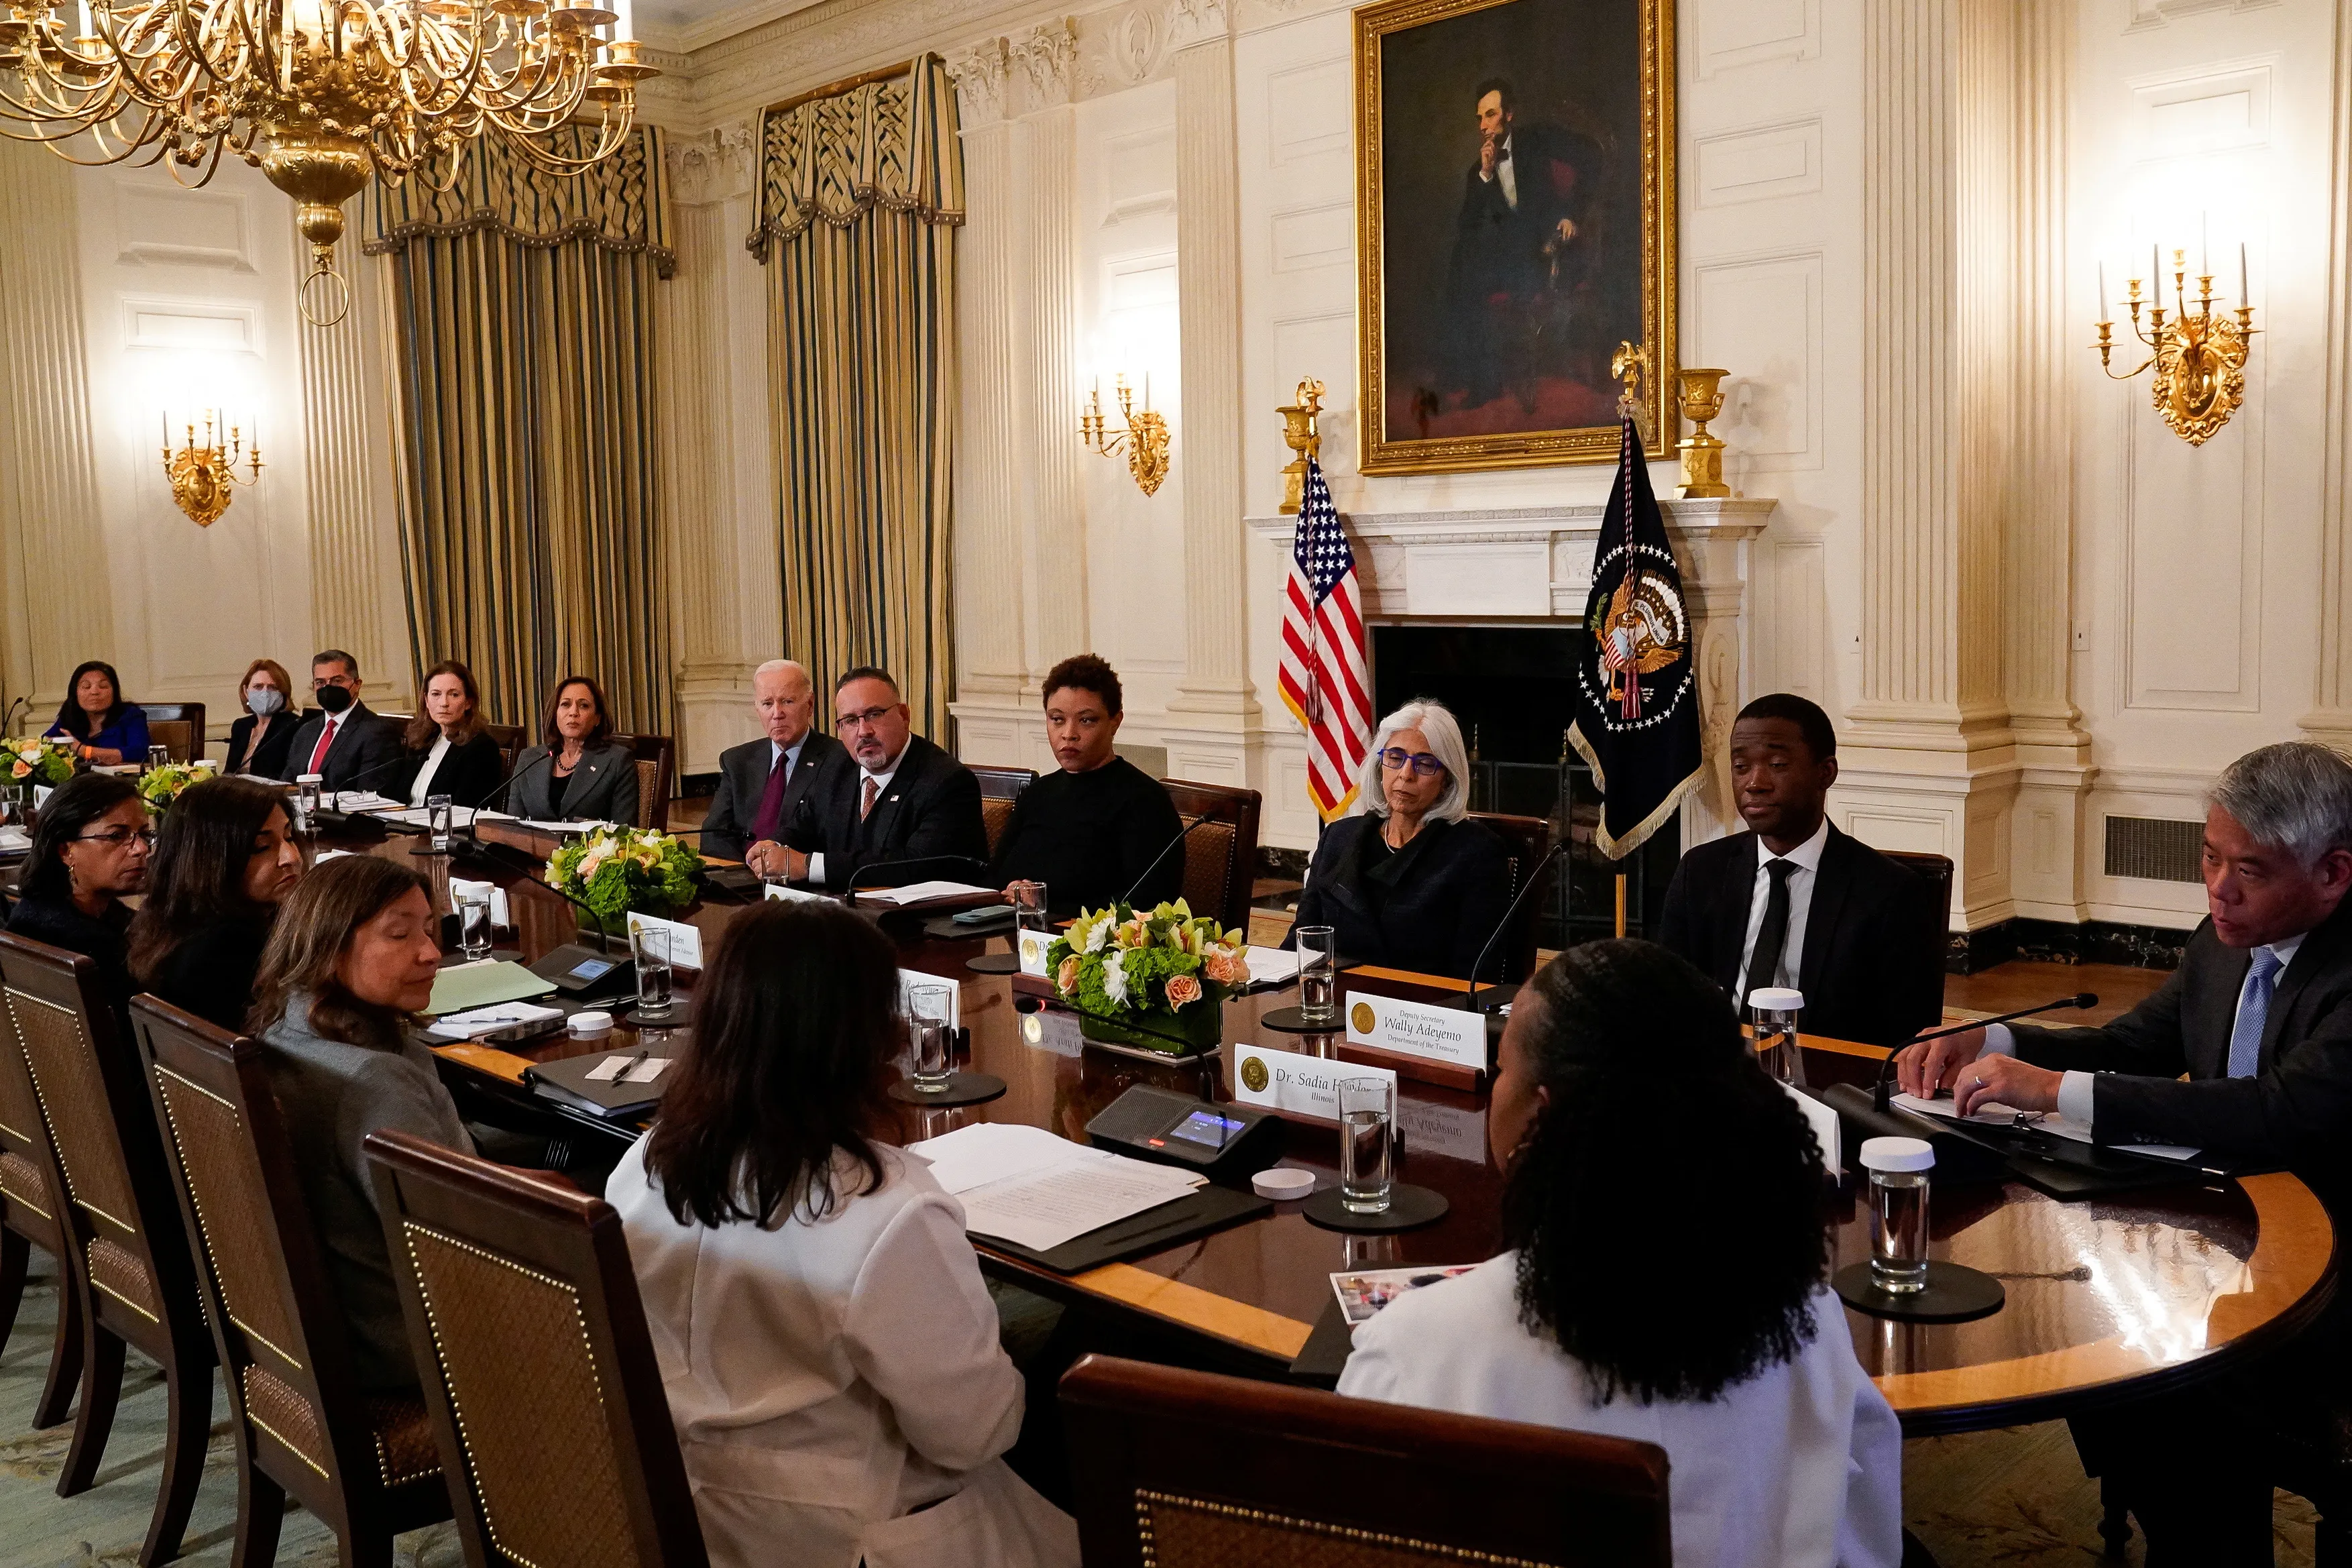 U.S. President Joe Biden, Vice President Kamala Harris and others listen to a guest doctor speak during a meeting of the Reproductive Healthcare Access Task Force in the State Dining Room at the White House in Washington, U.S., October 4, 2022. REUTERS/Elizabeth Frantz